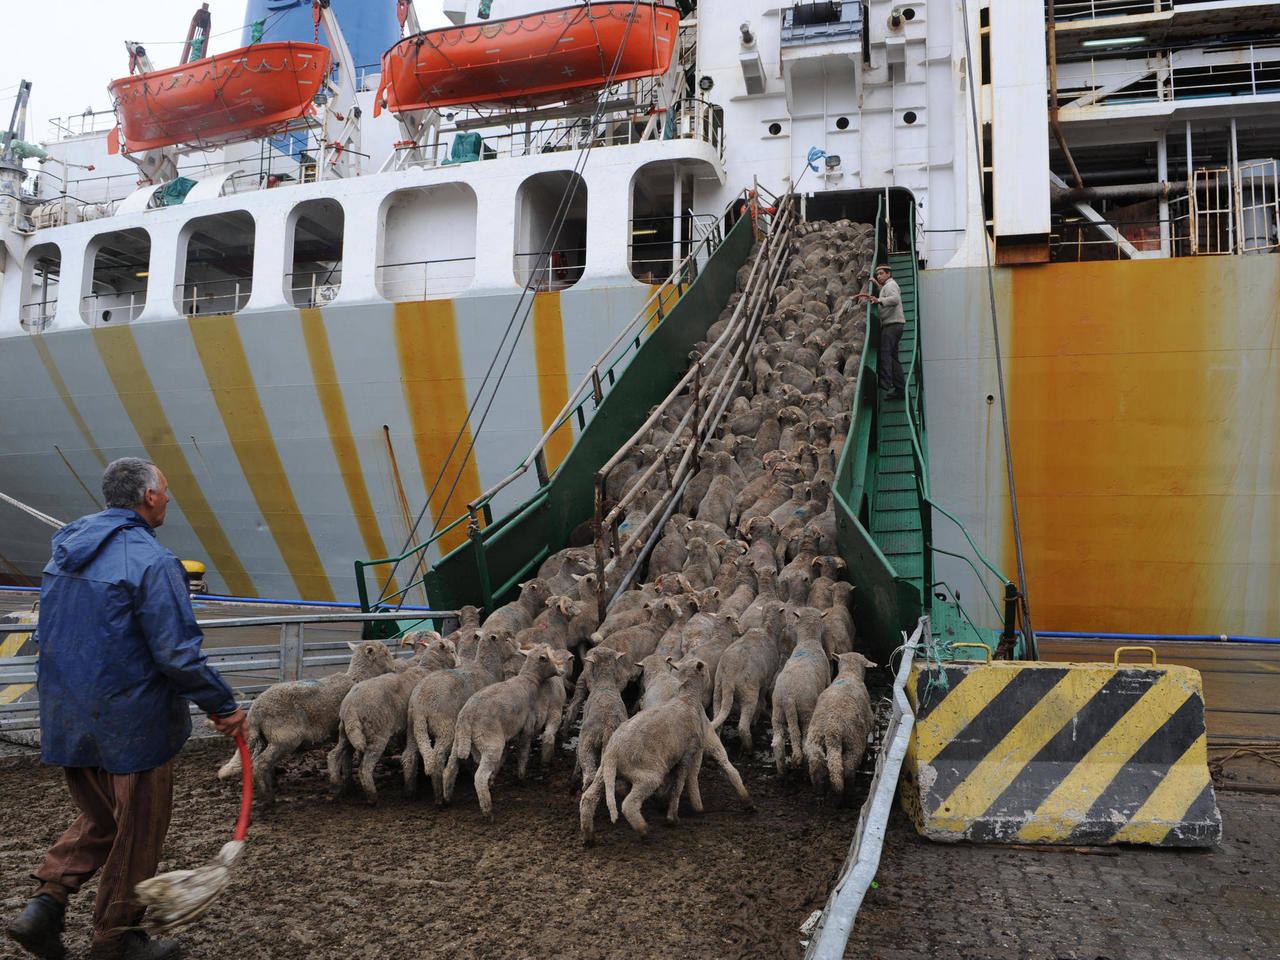 130,000 sheep are starving to death in front of the clogged Suez